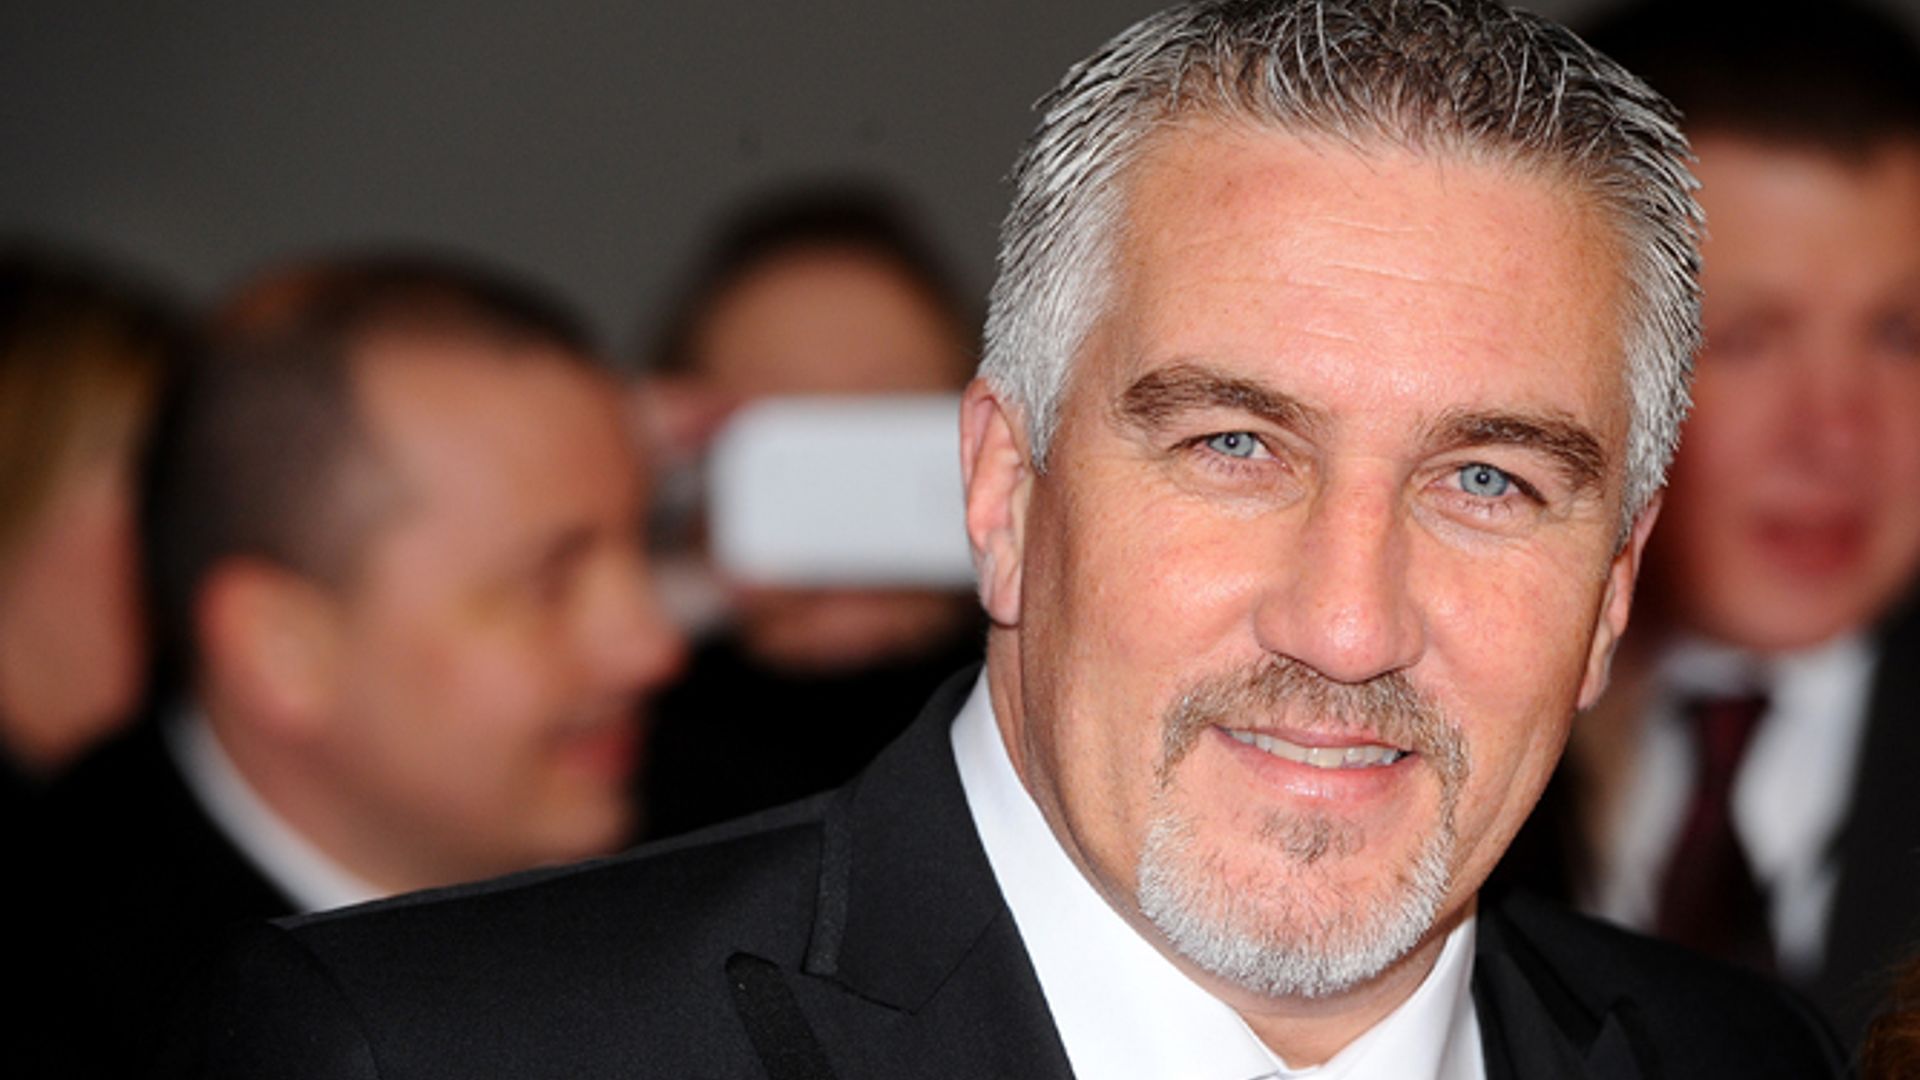 Paul Hollywood reveals he's edited to look mean on GBBO HELLO!